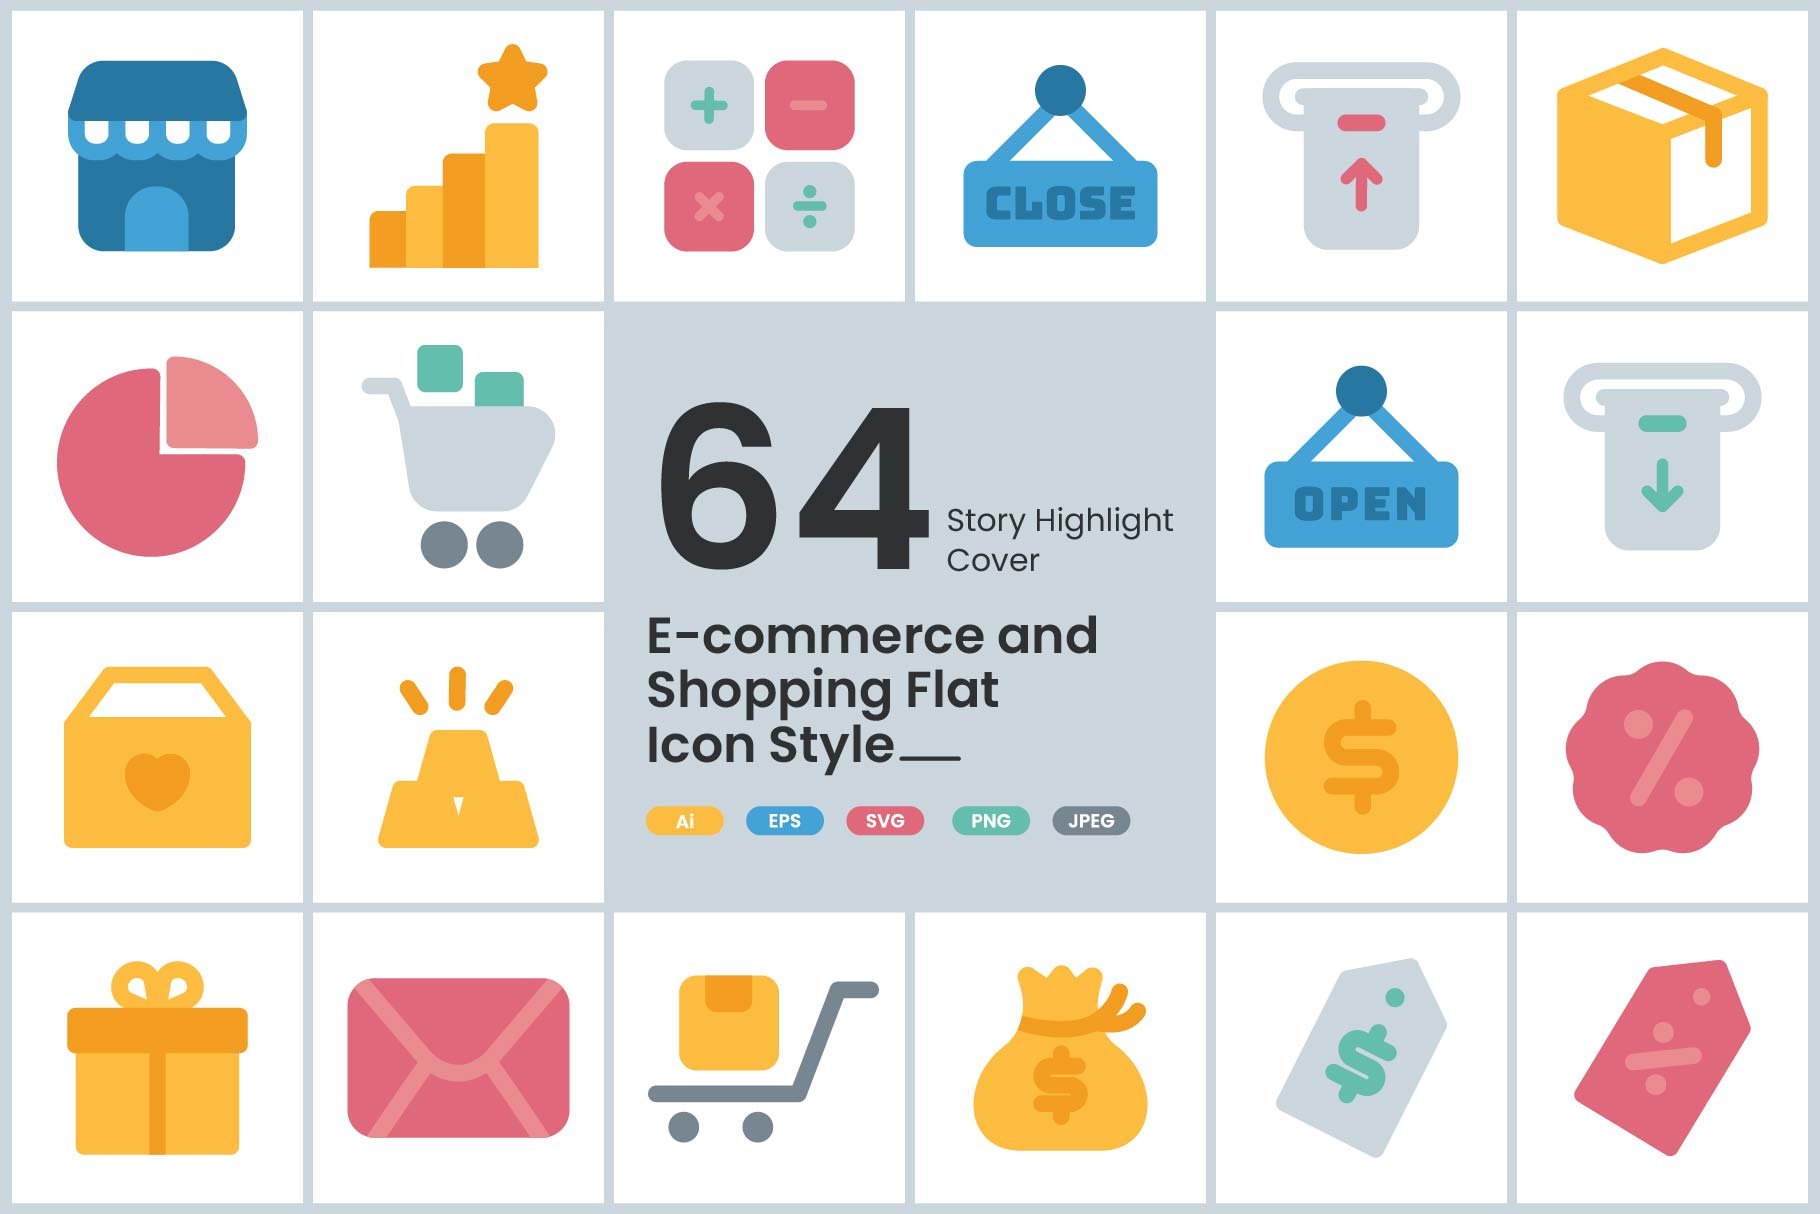 E-commerce and Shopping Flat Icon St cover image.